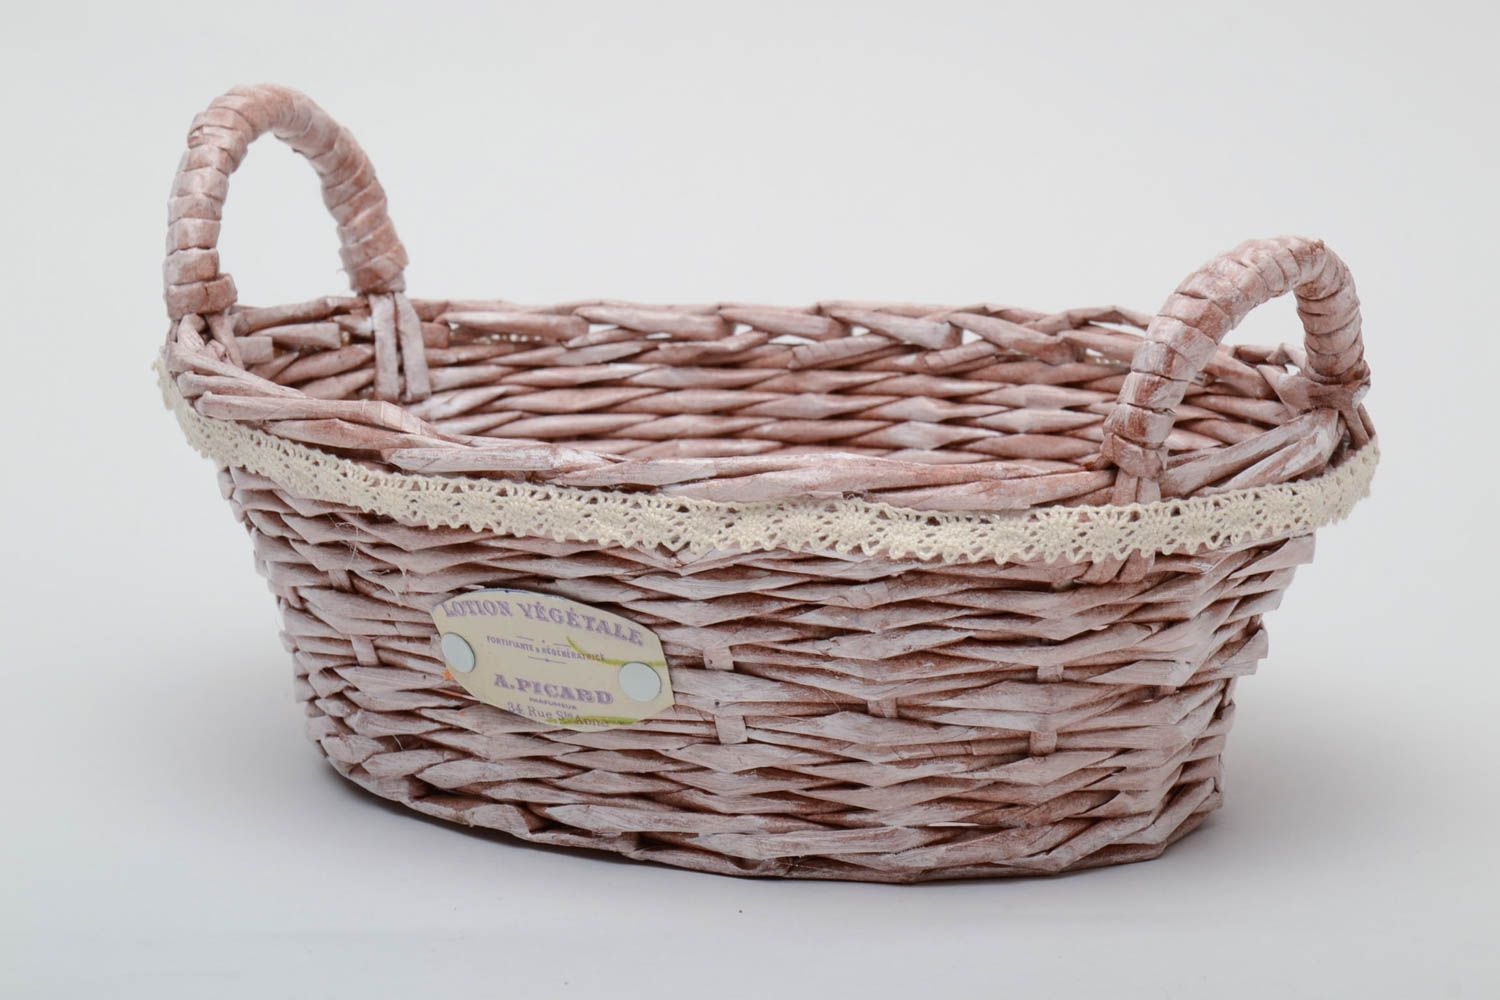 Newspaper basket for bread and fruit photo 2